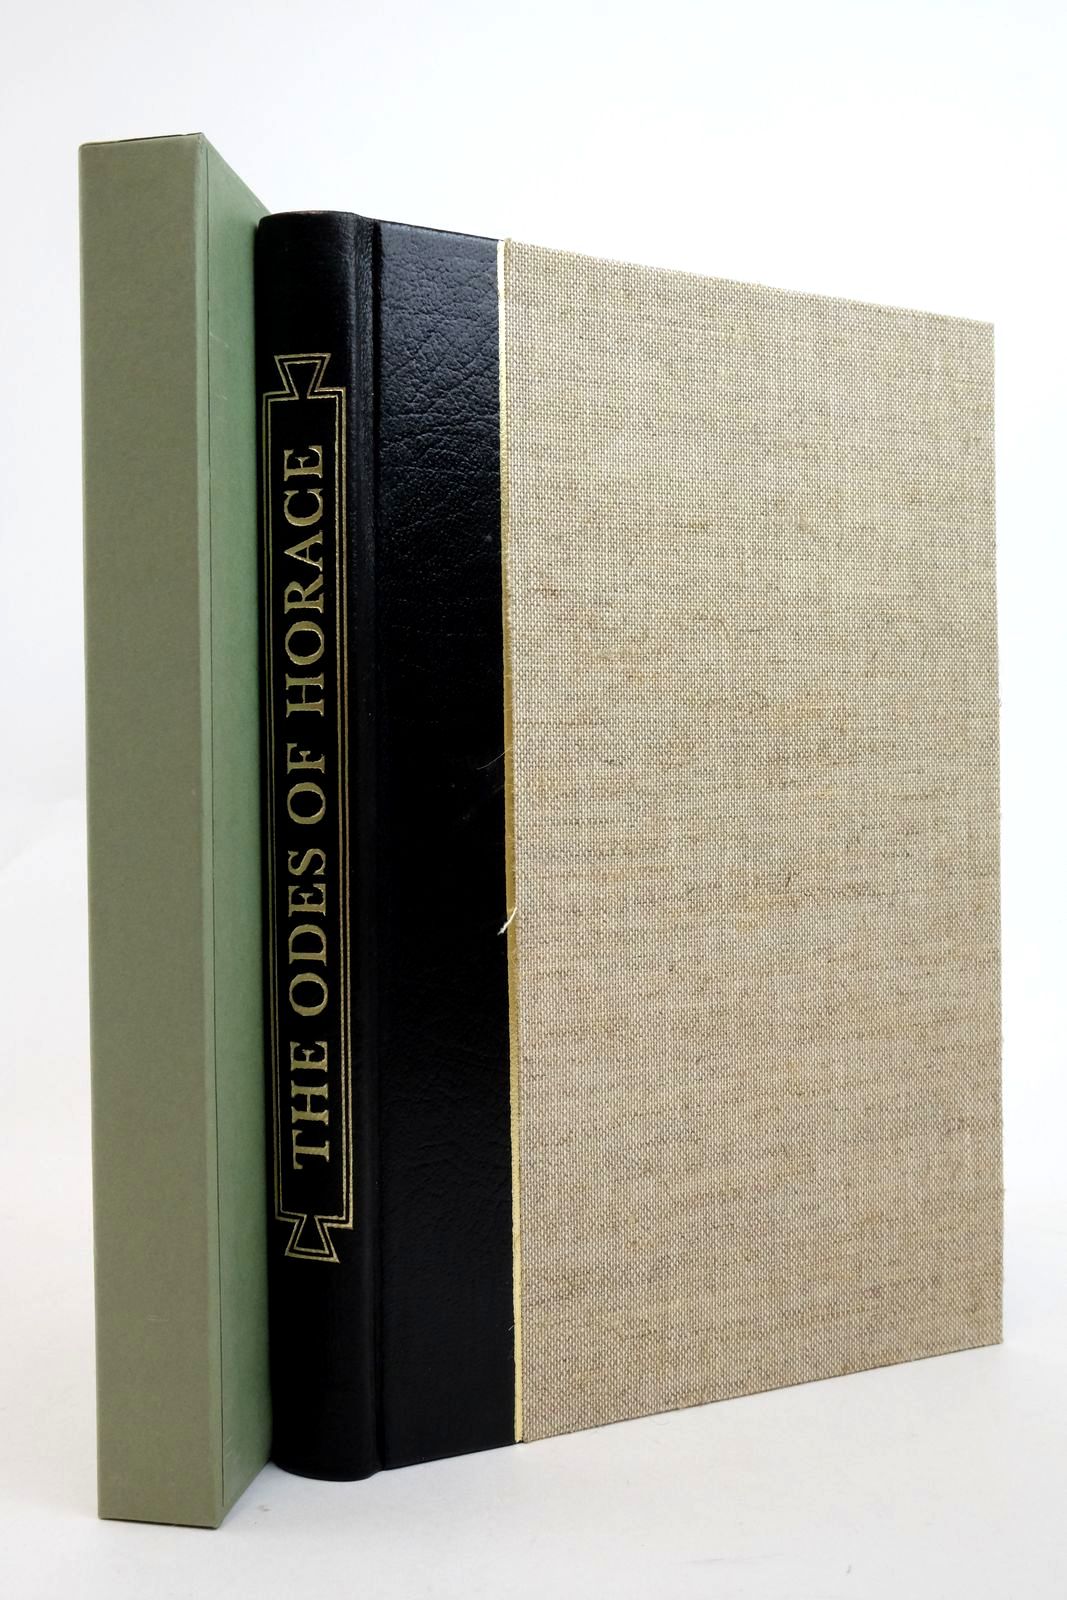 Photo of THE ODES OF HORACE written by Horace,  Michie, James illustrated by Frink, Elisabeth published by Folio Society (STOCK CODE: 2138250)  for sale by Stella & Rose's Books